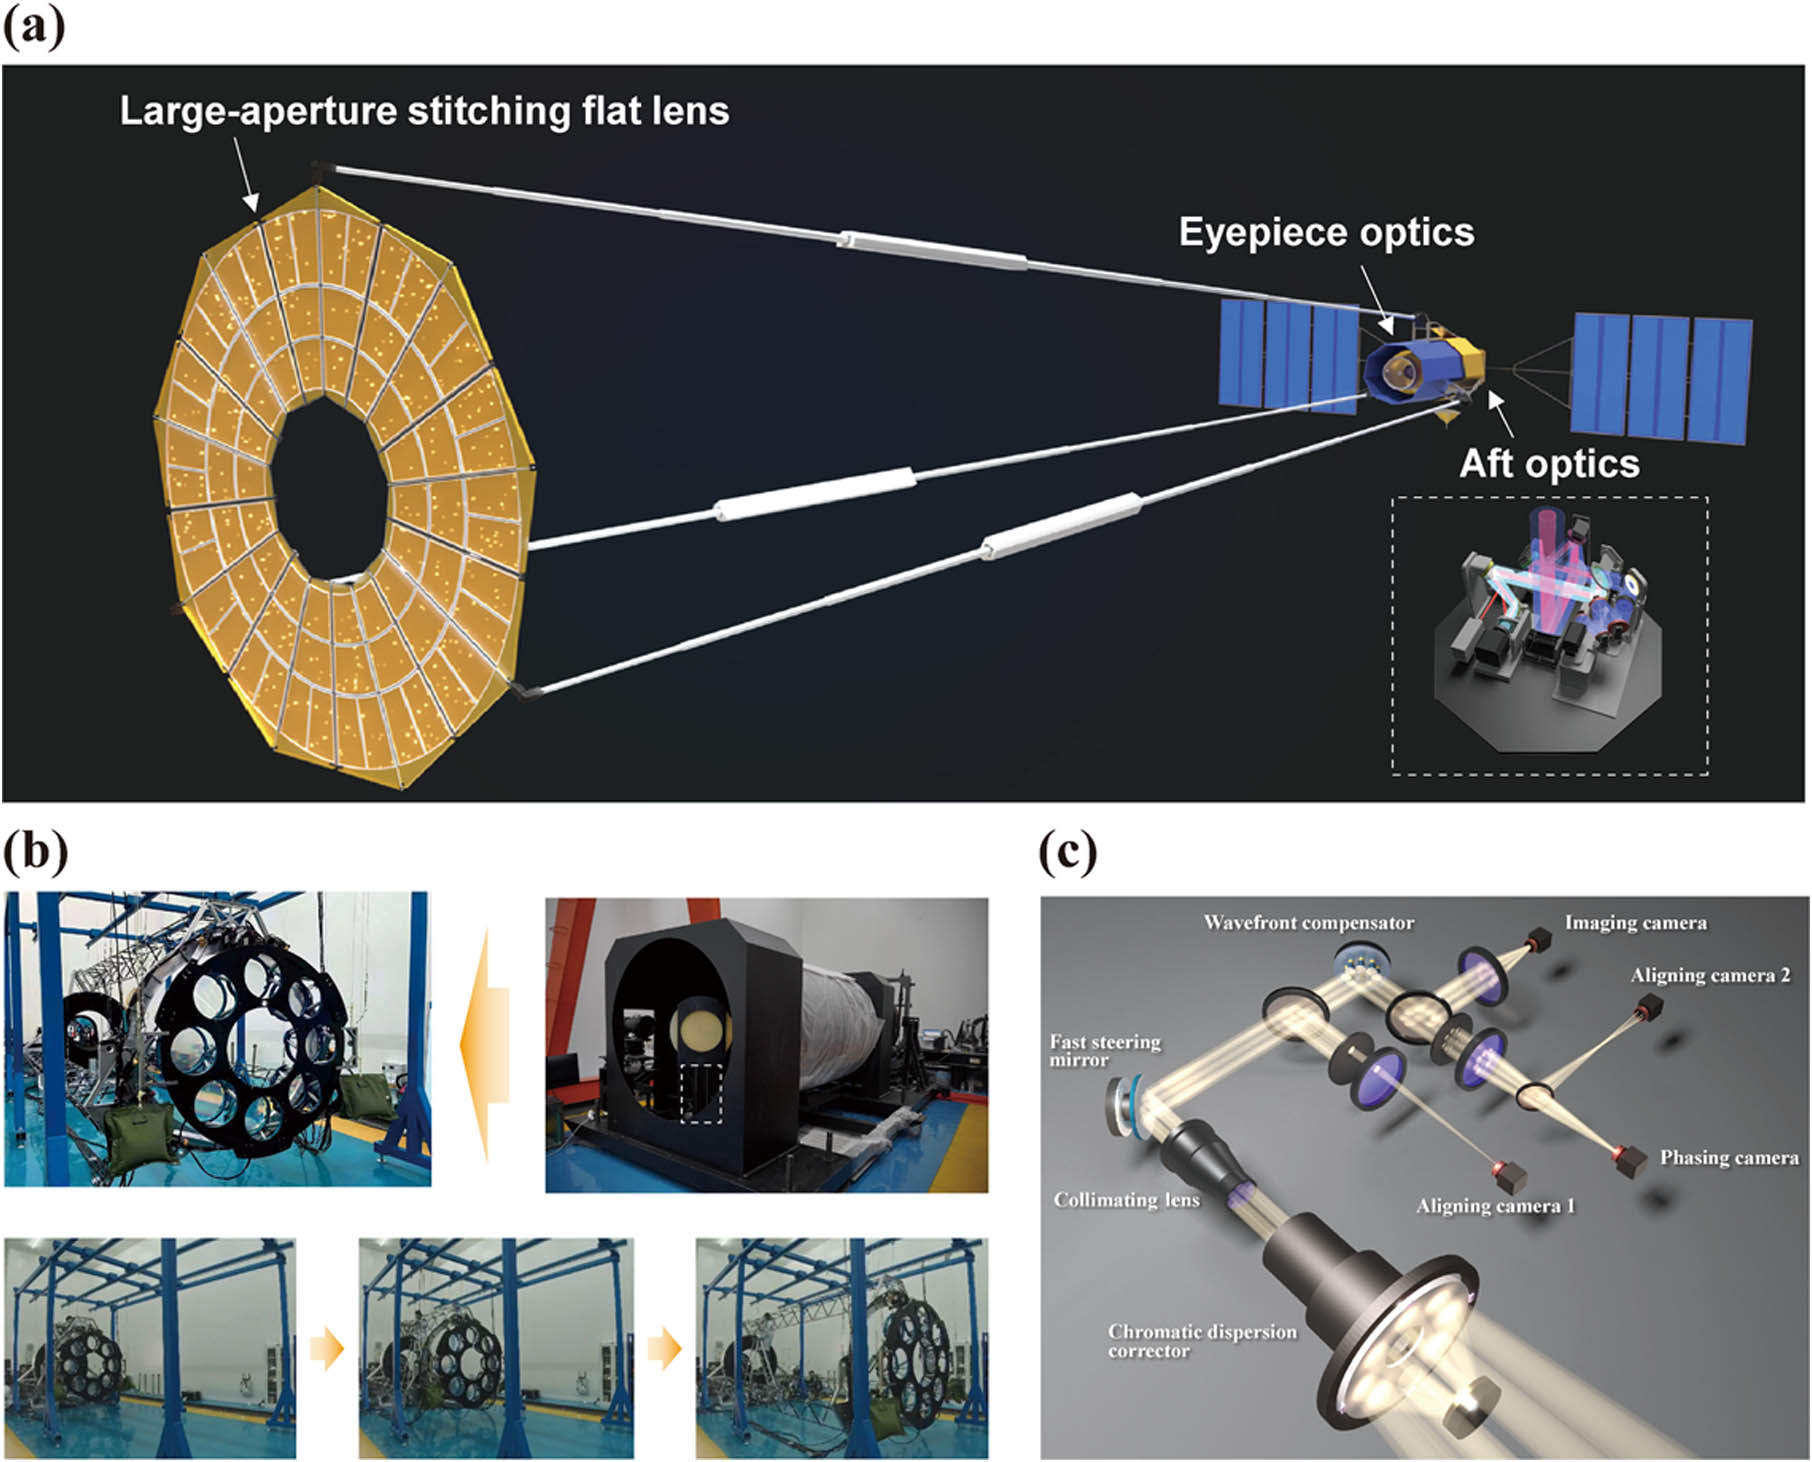 Ground testbed of the space-based flat imaging system. (a) Schematic of an exemplary space-based giant flat imaging system, including a stitching flat lens with aperture larger than 10 m, eyepiece optics, and aft optics. (b) Ground testbed of a 1.5-m spaceborne stitching flat imaging system. The segmented flat lens is initially folded, then unfurled, and finally stretched. The source is located at the focus of a 1.5-m collimator to simulate objects at infinity. (c) Setup of the aft optics of the 1.5-m flat imaging system. Light cofocused by the seven flat segments is first chromatism-corrected, then collimated, and finally split into the two aligning cameras, the phasing camera, and the imaging camera, respectively.